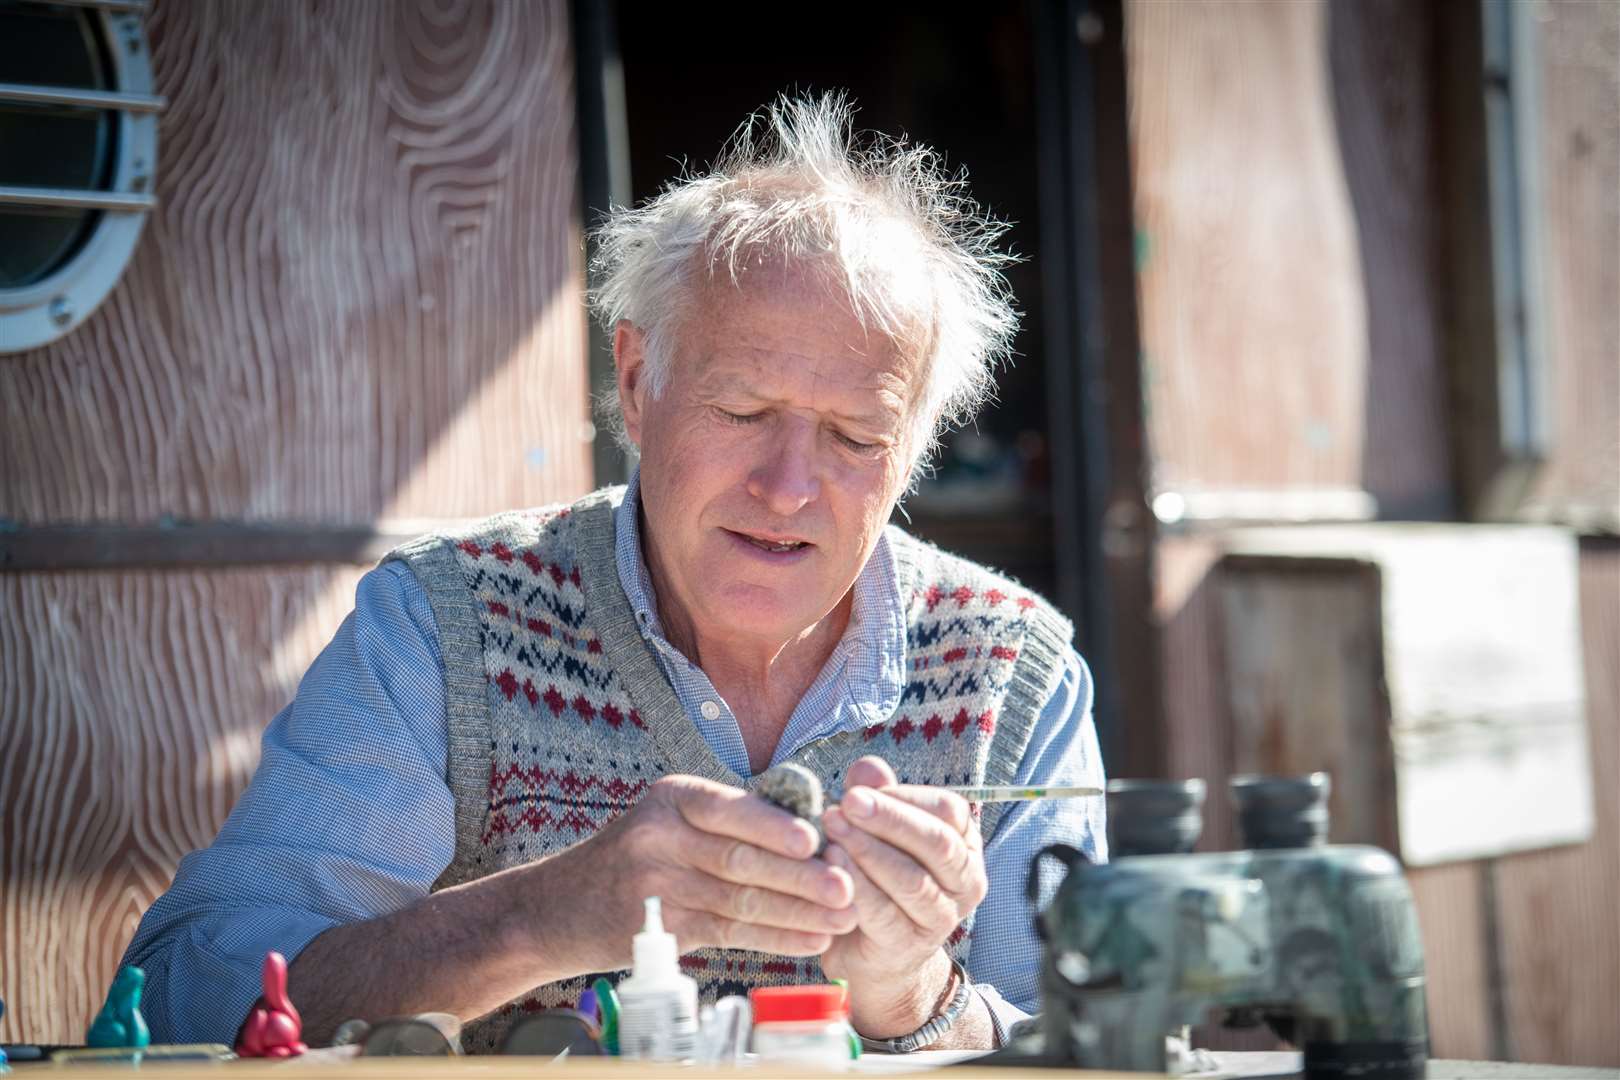 While he waits for a sighting of the Loch Ness Monster, Steve Feltham makes clay models of Nessie. Picture: Callum Mackay.